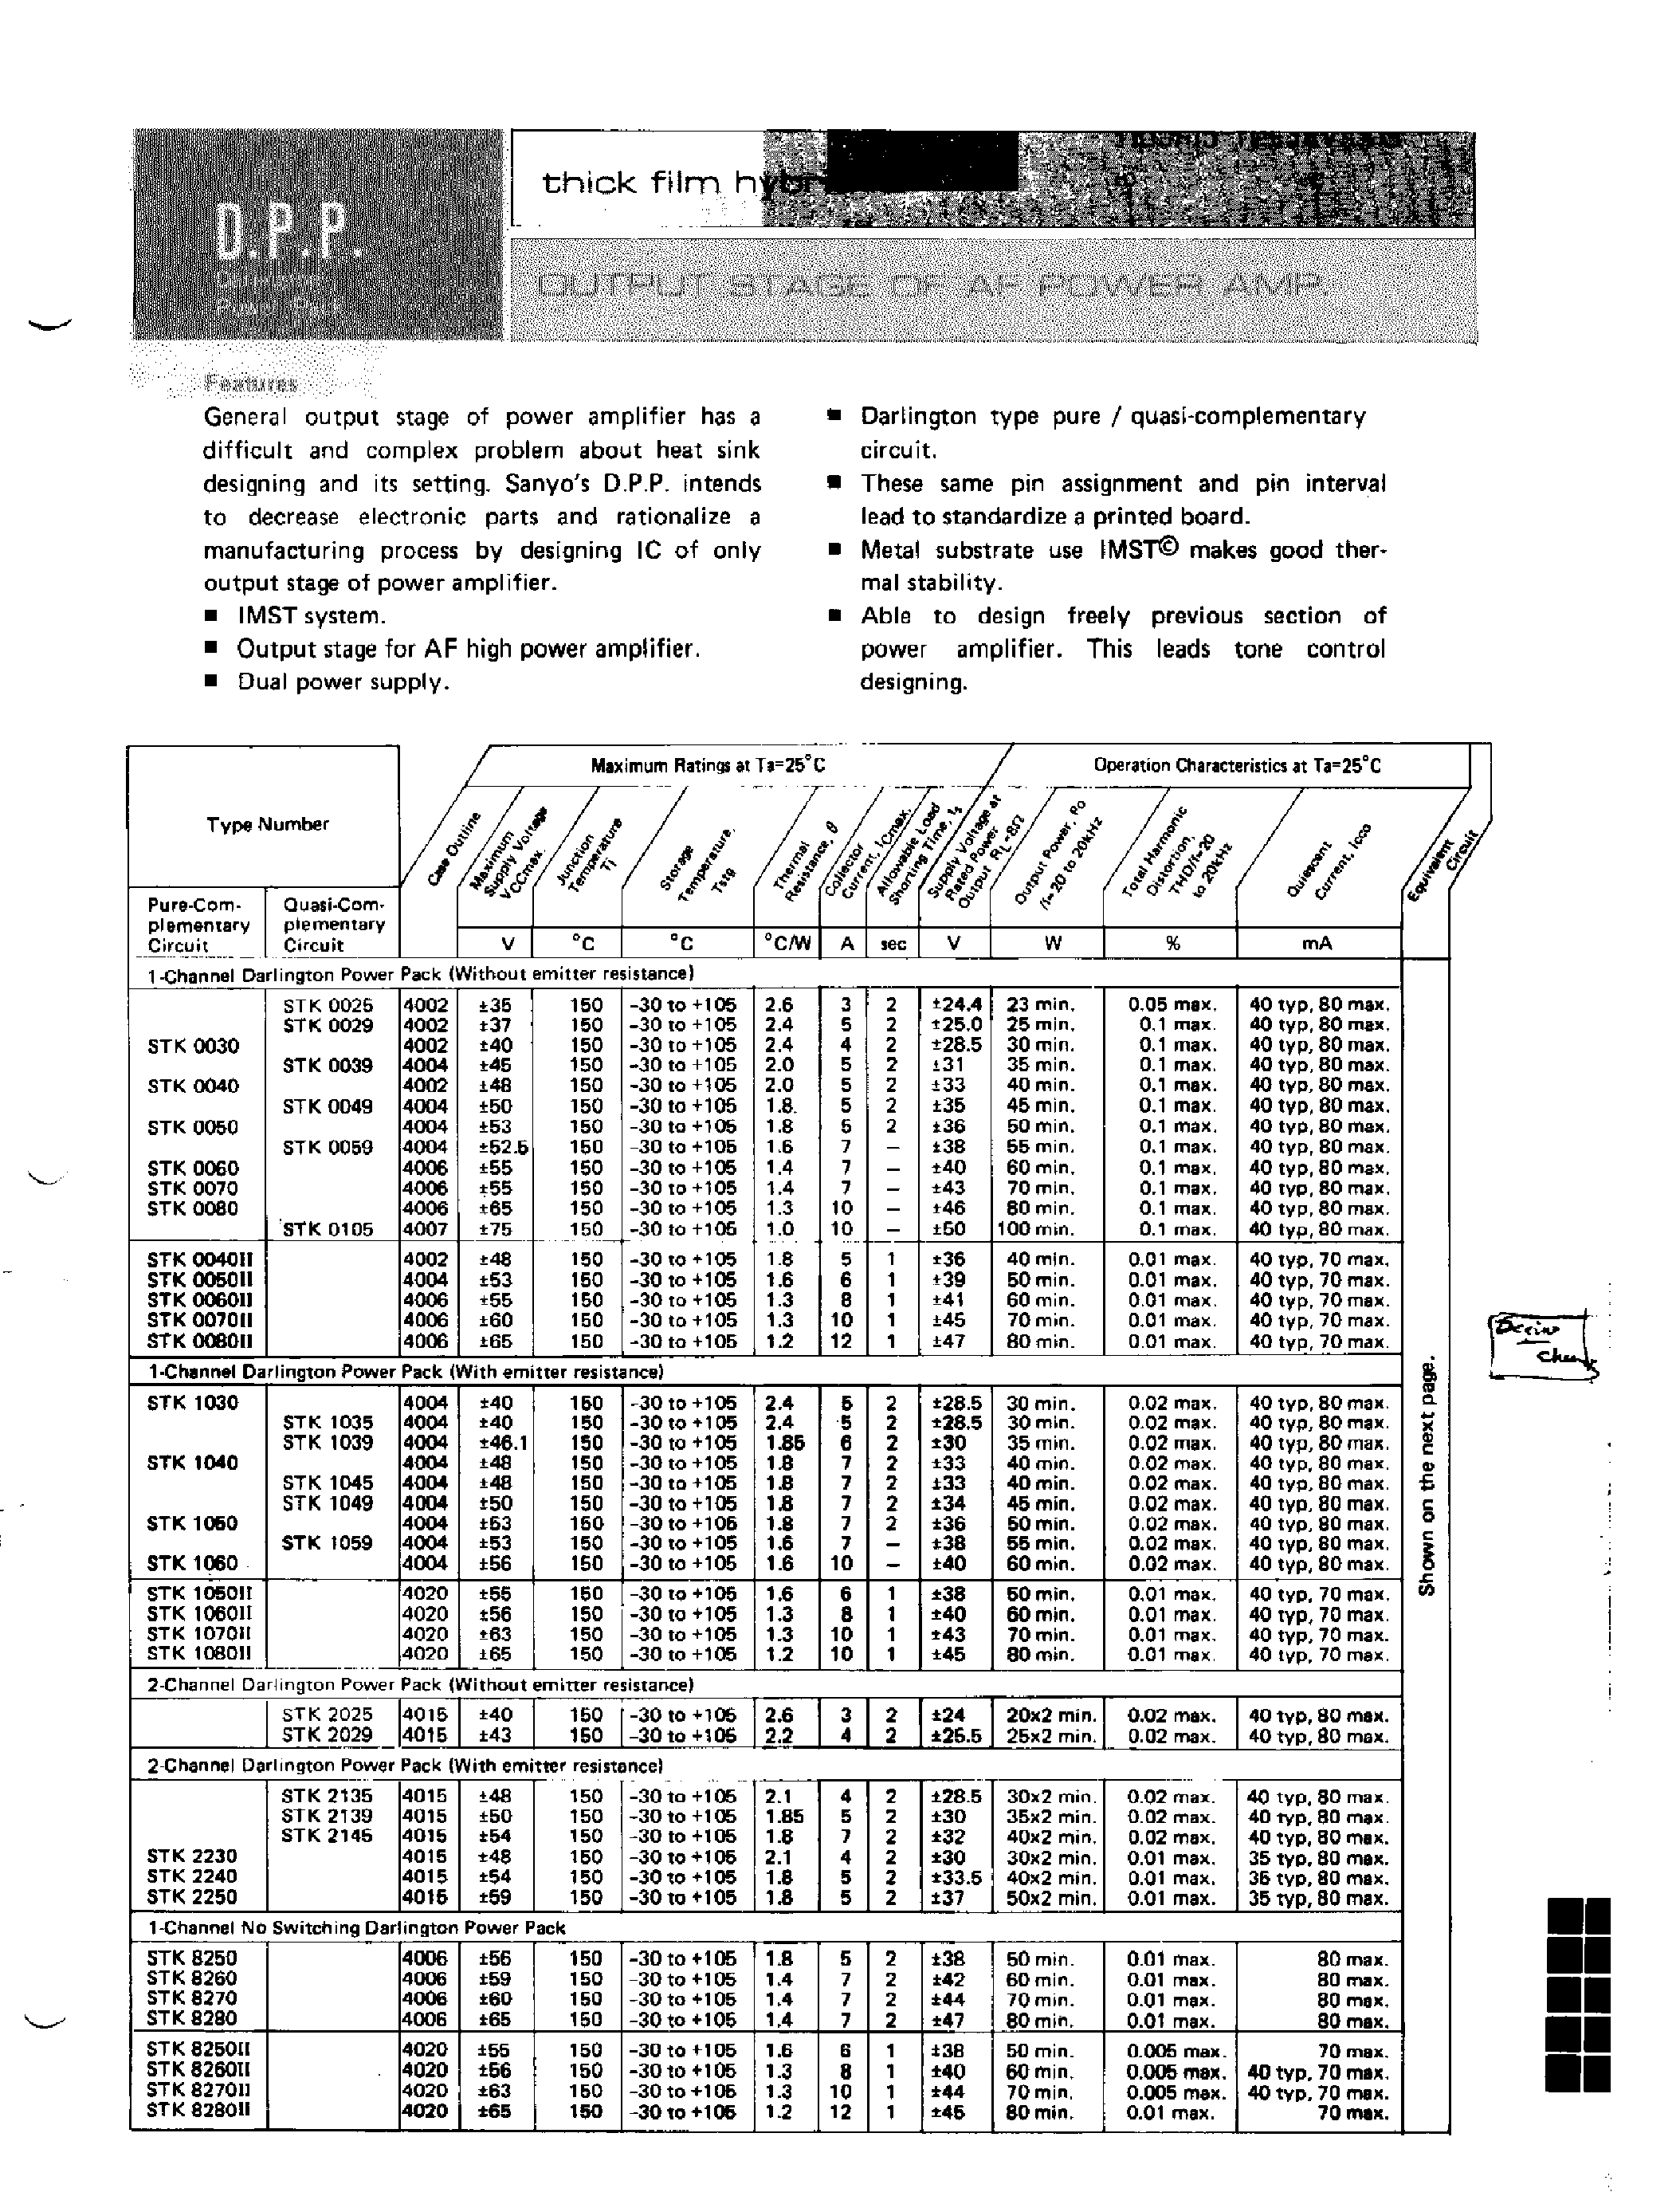 Datasheet STK1070II - OUTPUT STAGE OF AF POWER AMP page 1